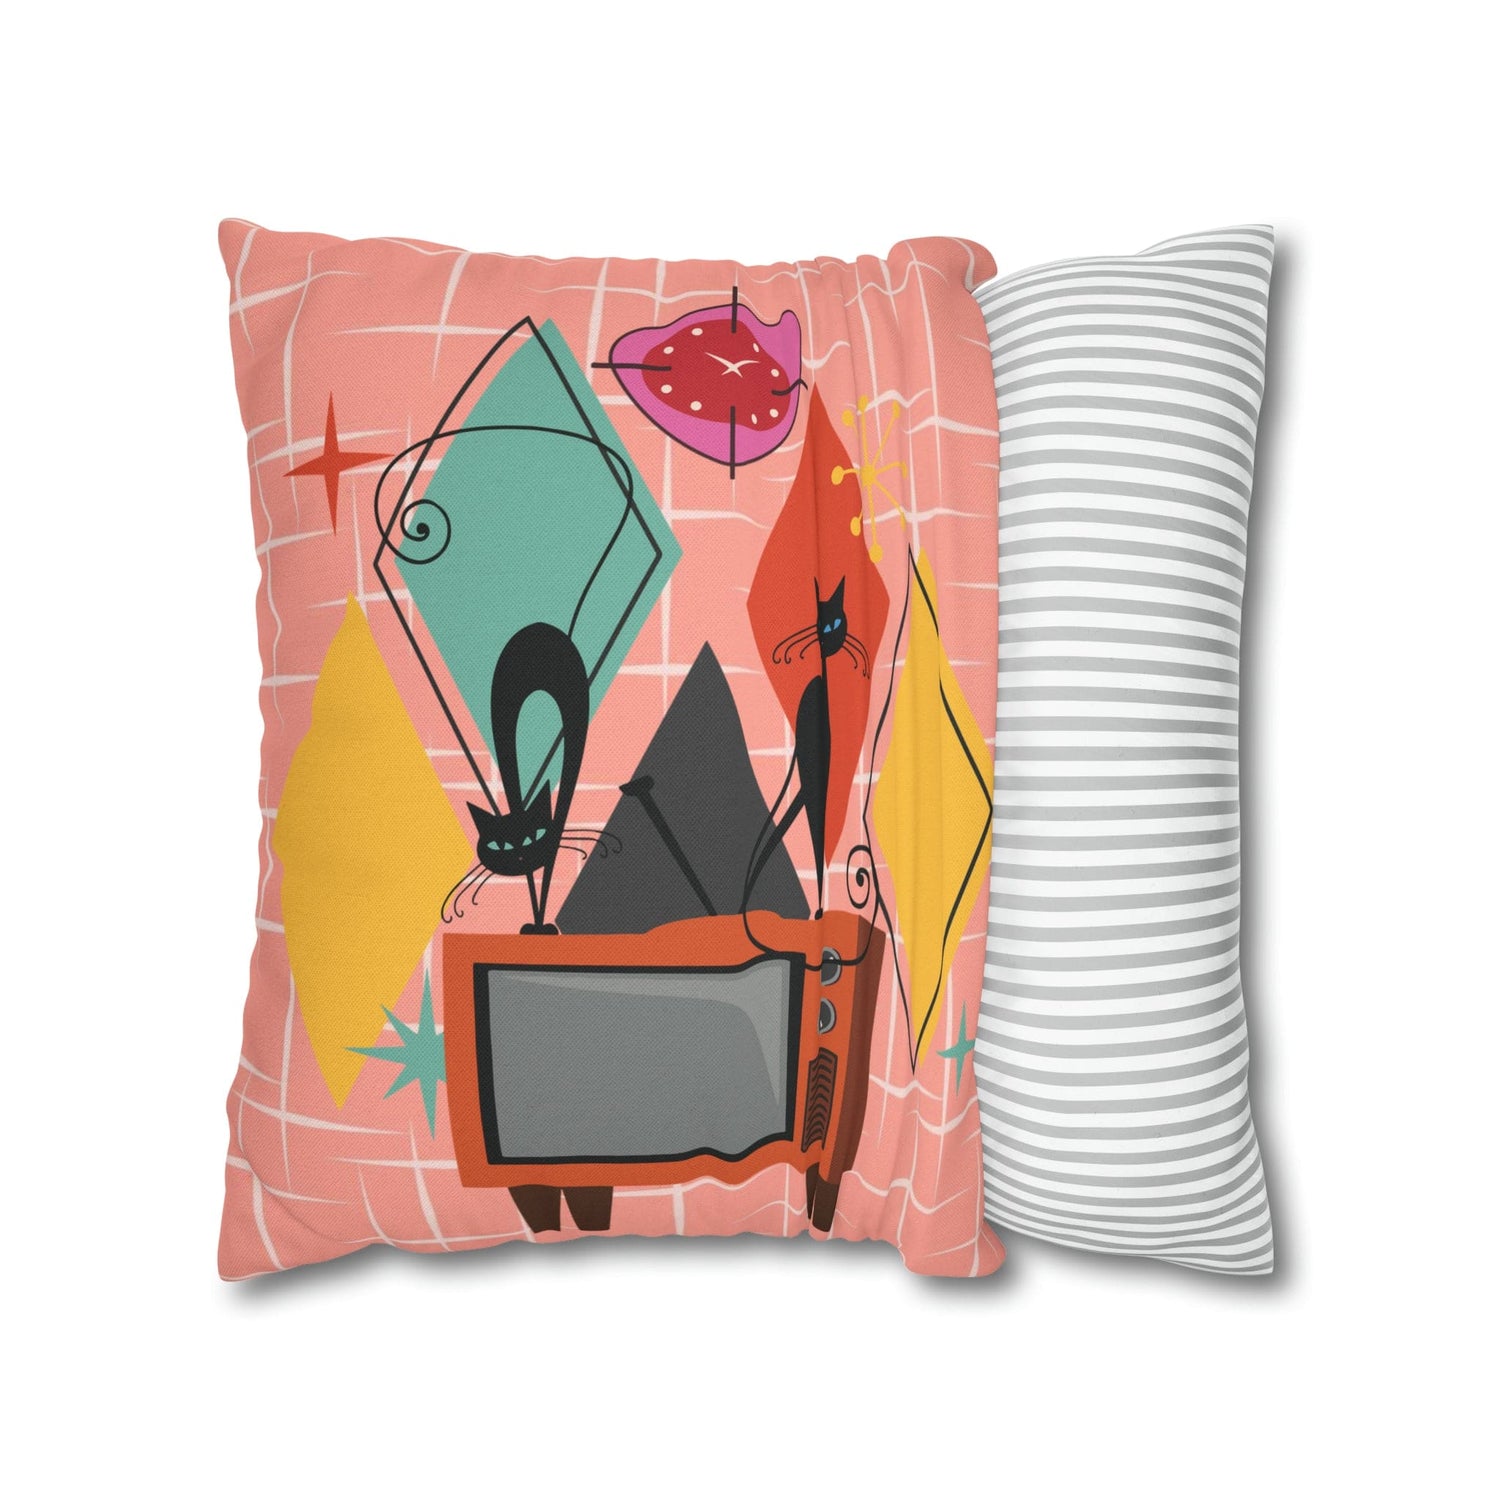 Kate McEnroe New York Atomic Cat Retro TV Pillow Cover, Mid Century Modern Orange, Teal, Yellow, Pink Cushion Covers, MCM Pillow CaseThrow Pillow Covers28026697588794533196